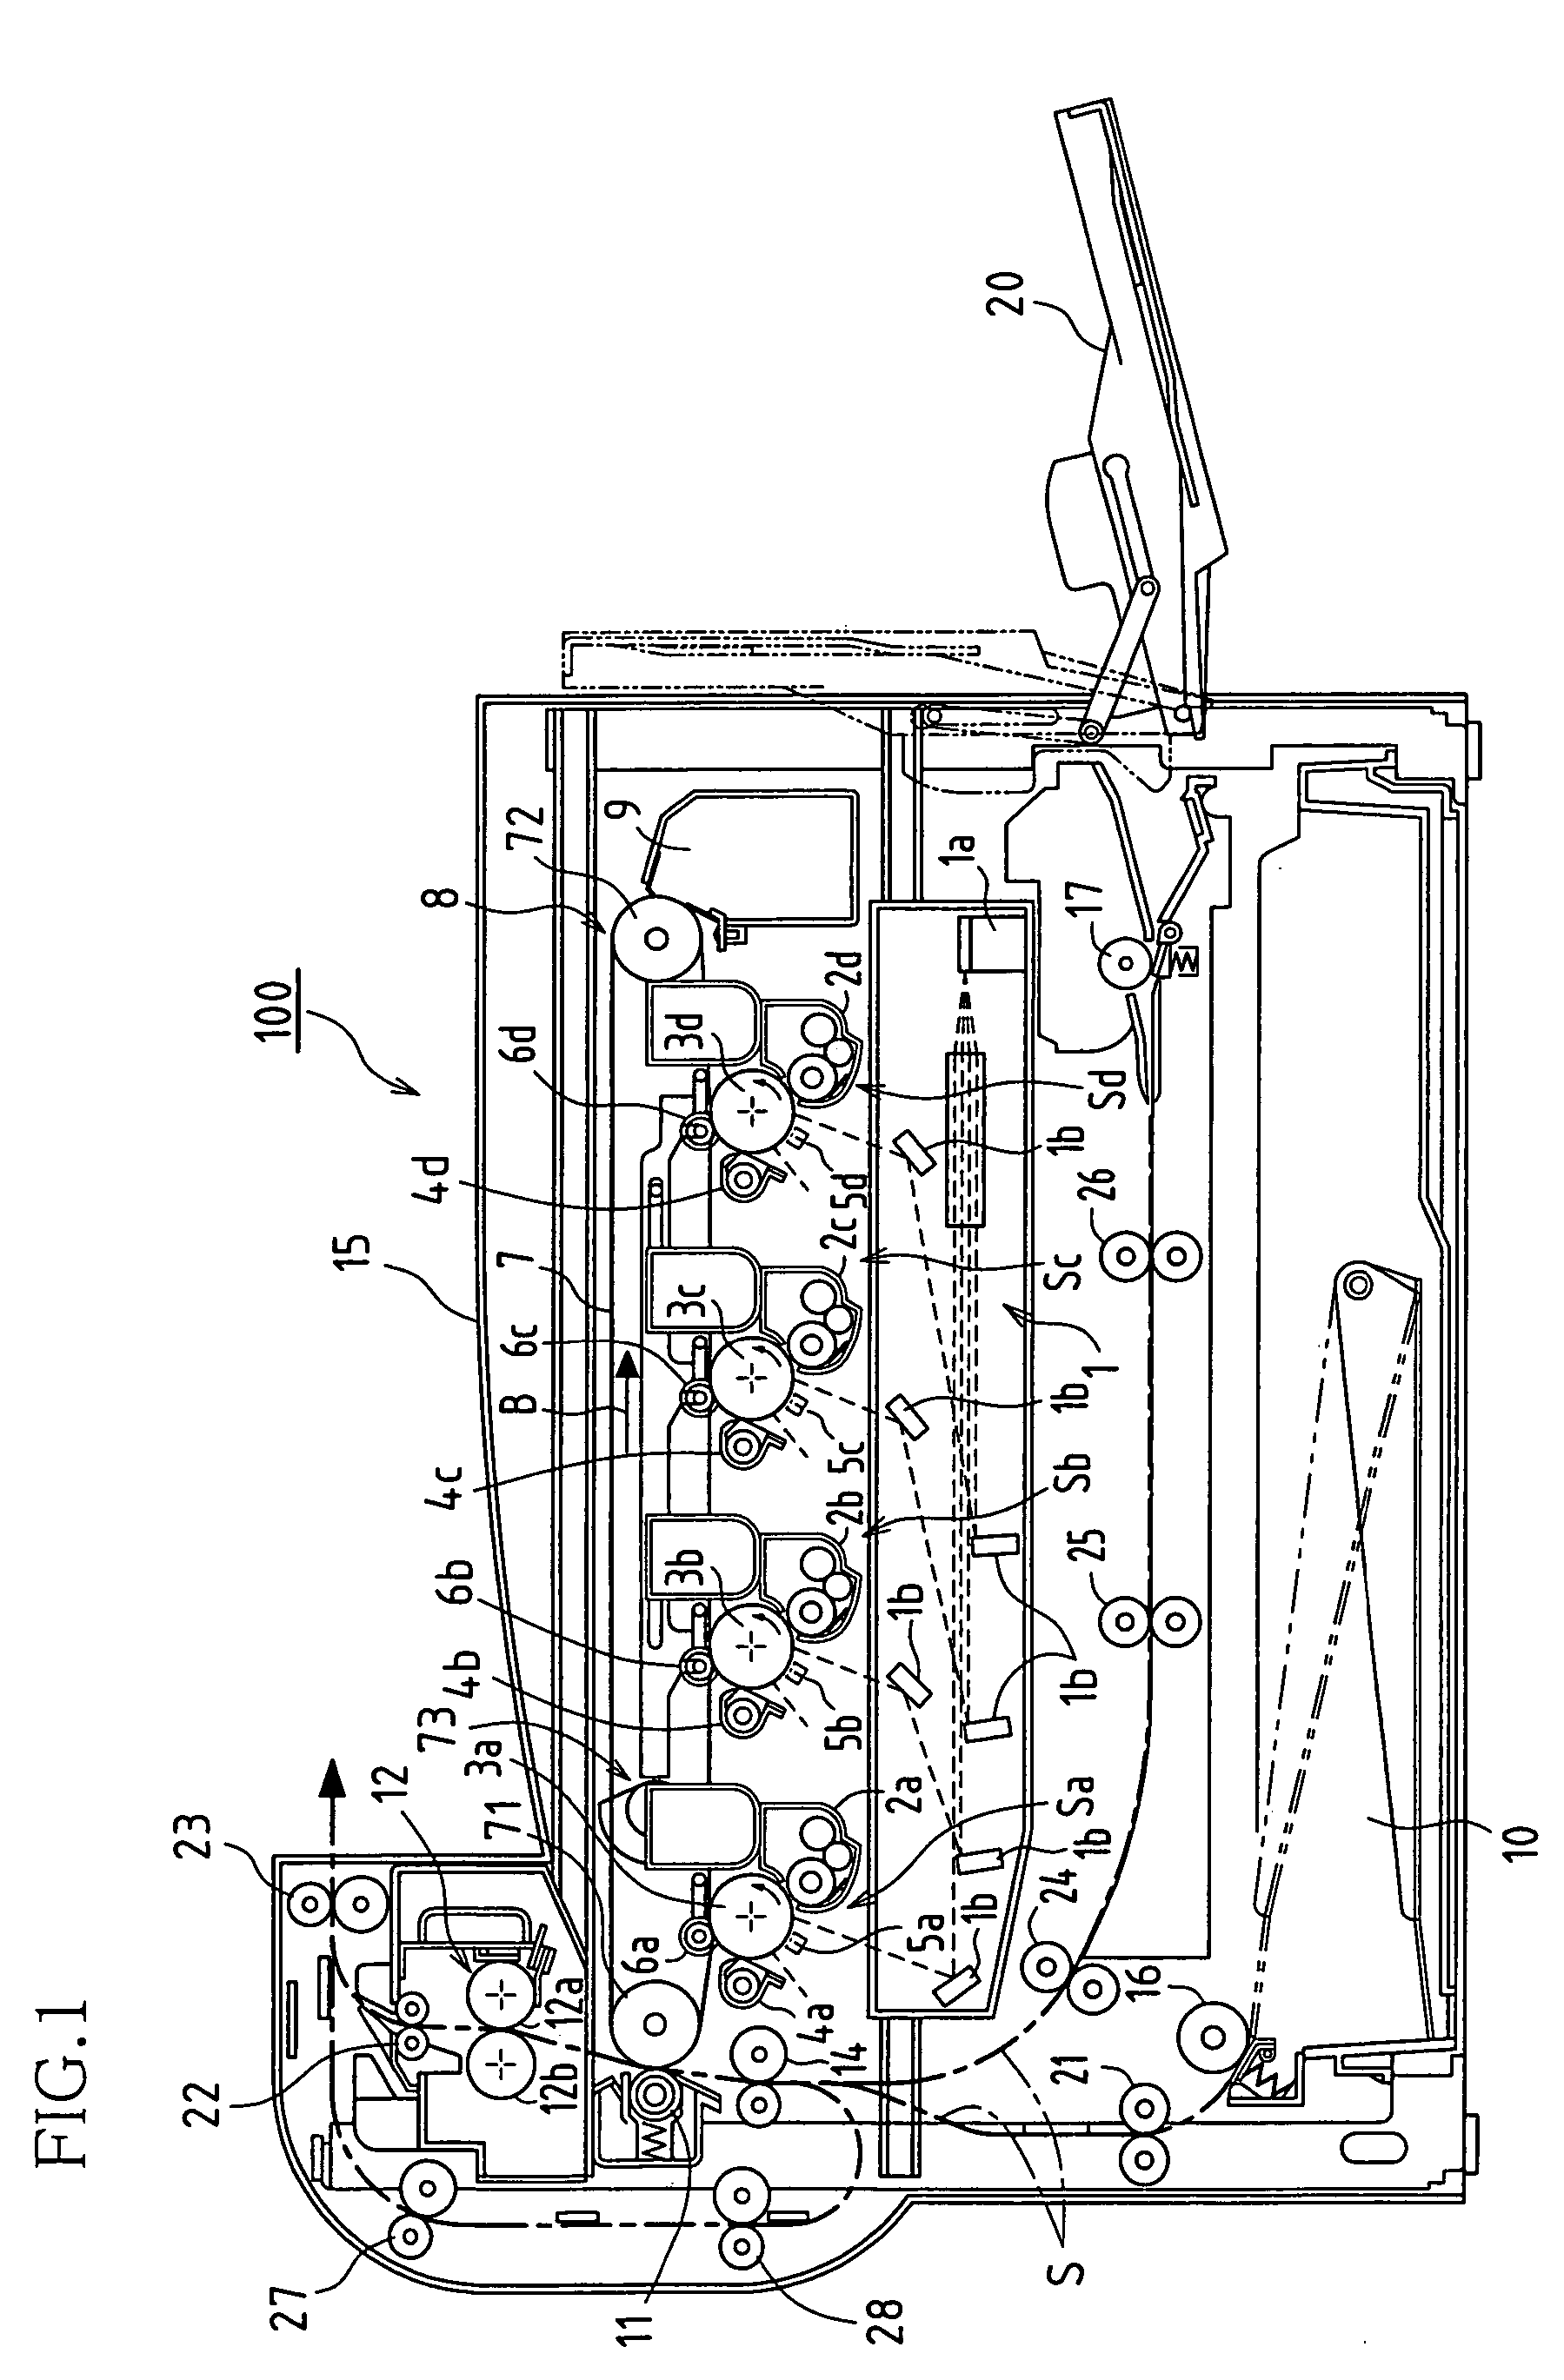 Image forming apparatus having charging unit with separate intake and exhaust ducts